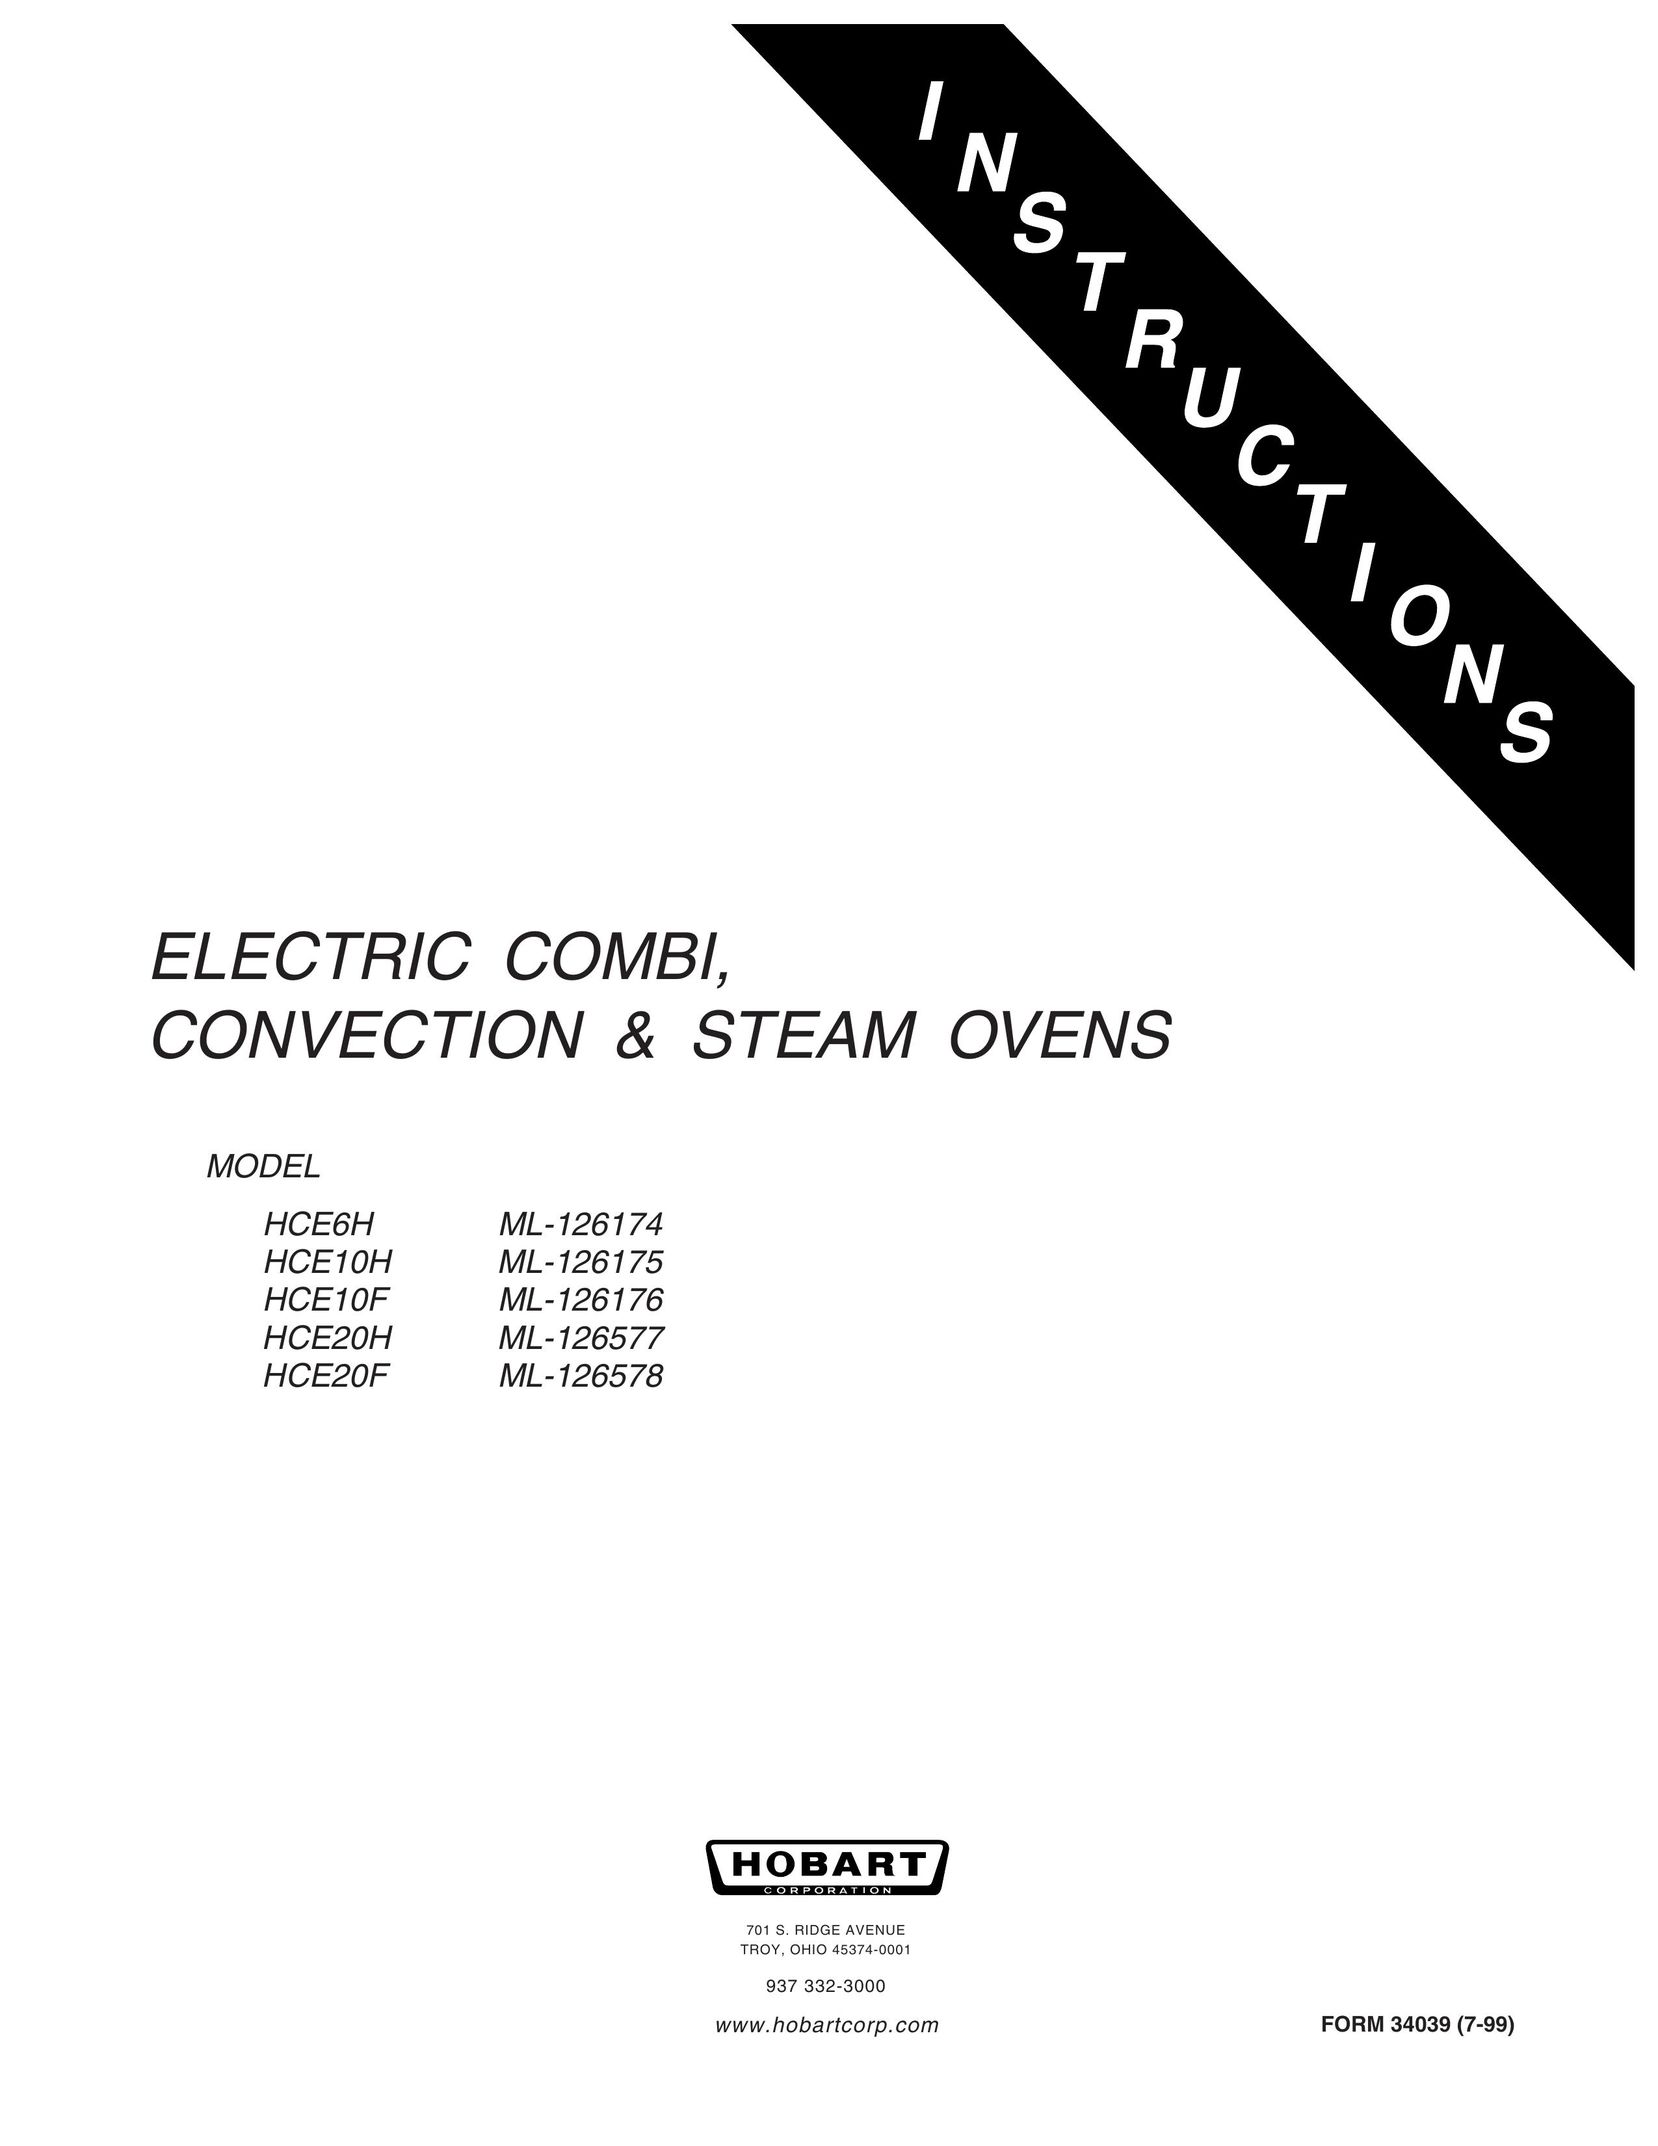 Hobart HCE20F ML-126578 Convection Oven User Manual